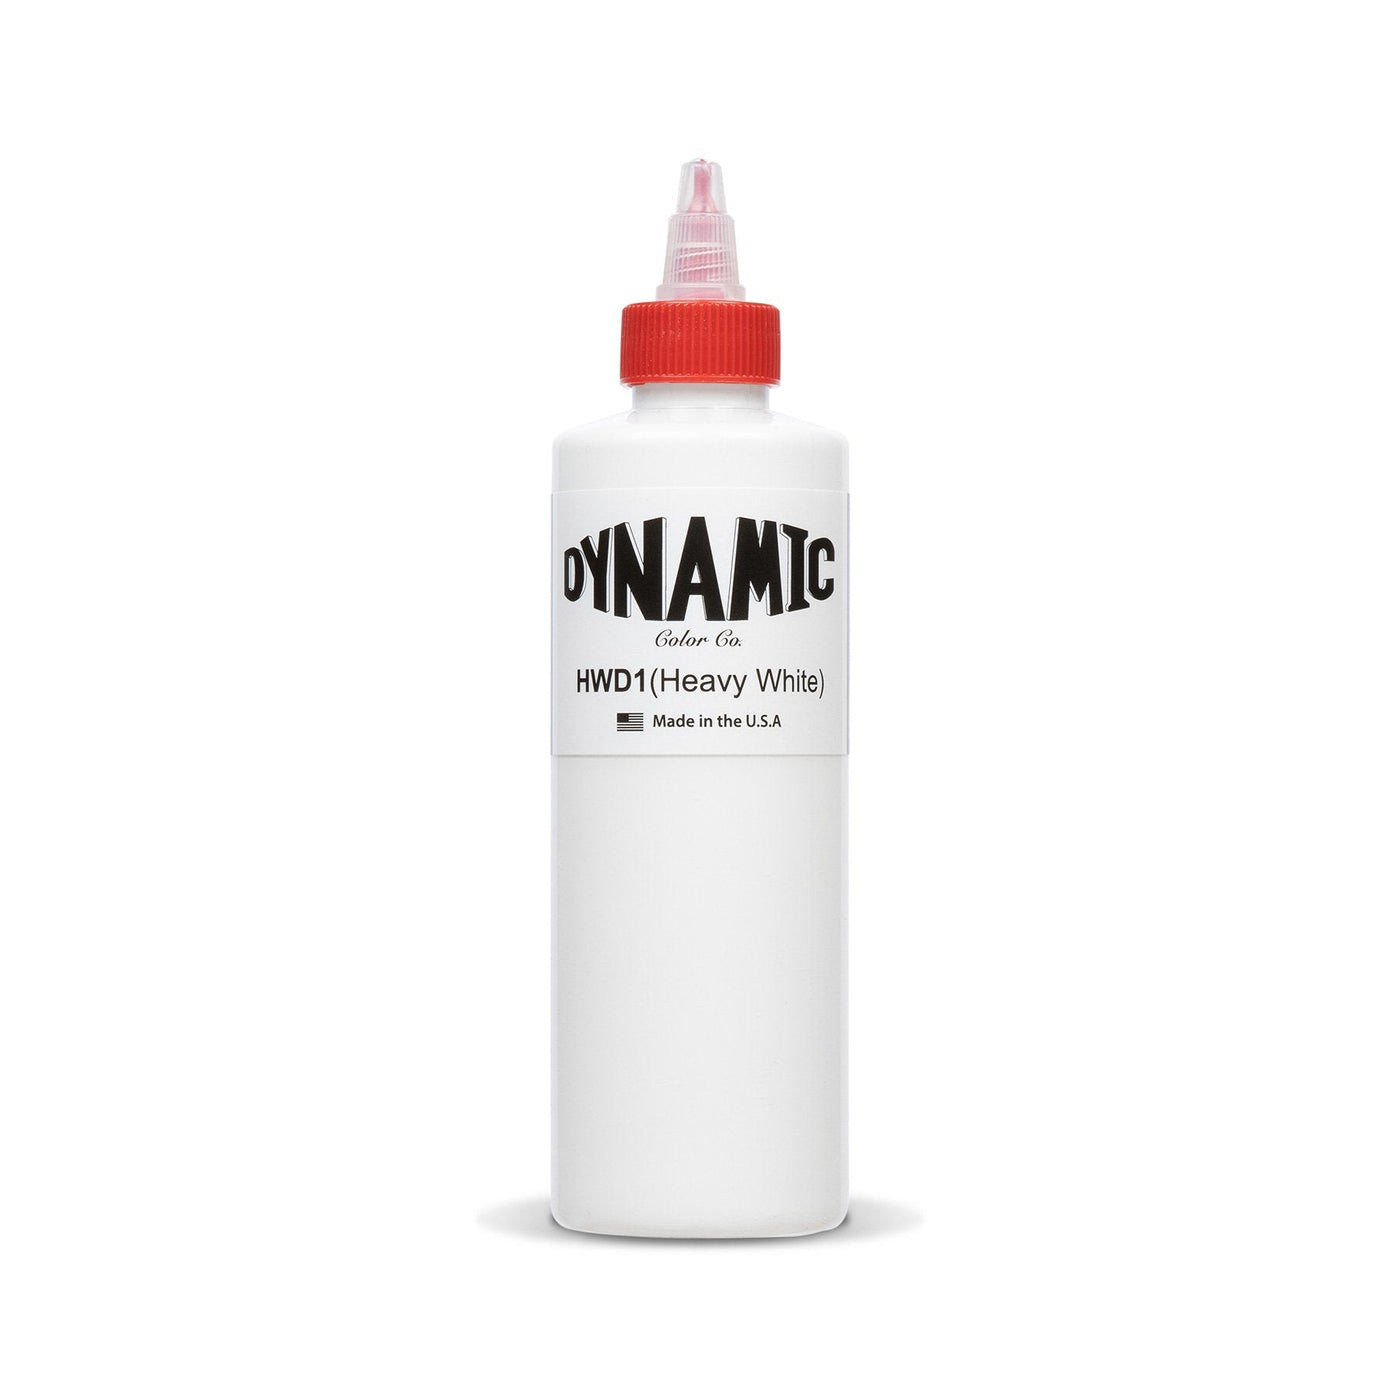 Dynamic Non Mixing Heavy White Tattoo Ink - Tattoo Ink - FYT Tattoo Supplies Canada